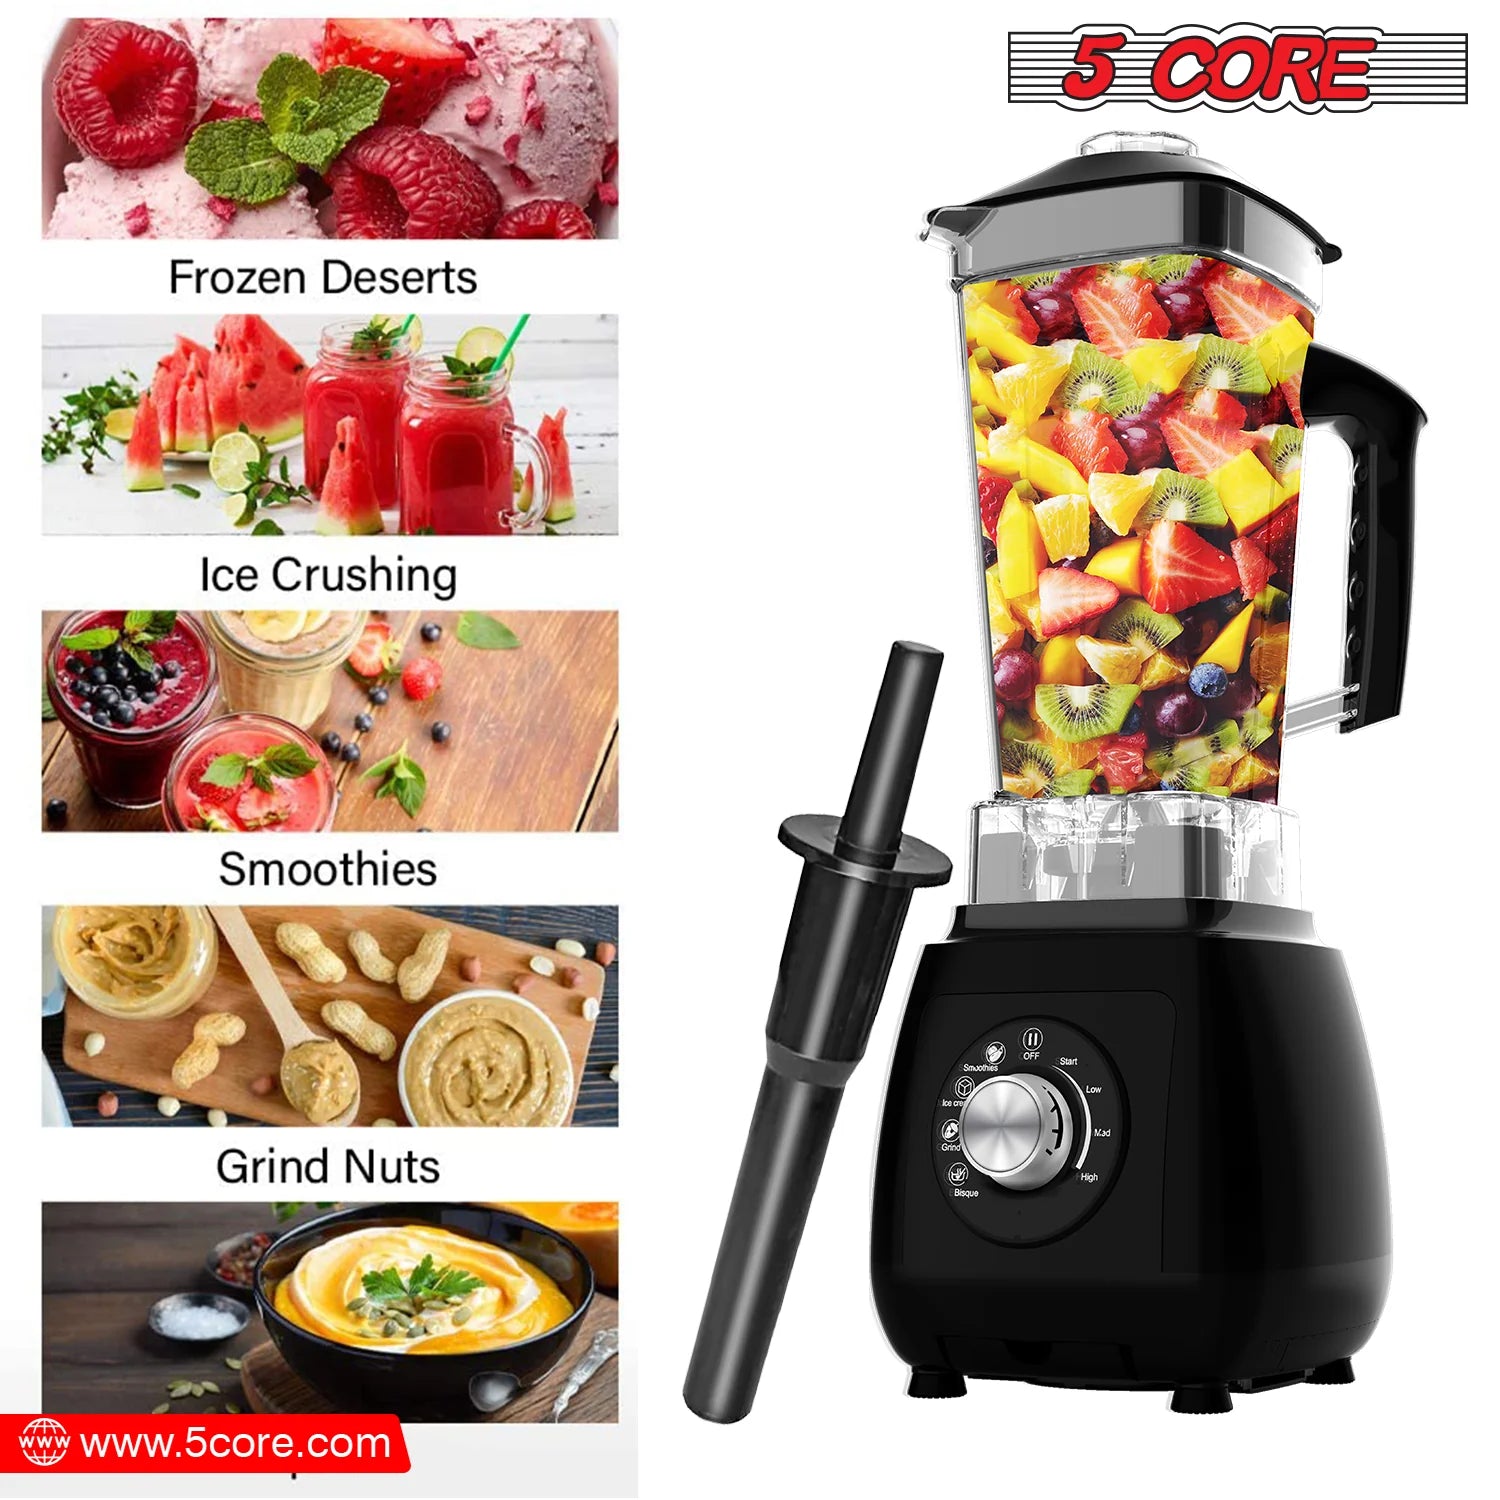 5 Core Personal Blender for Shakes & Smoothies/ Portable Blender 68 Oz Capacity, Titanium Blade, Travel Cup & Lid/ Heavy-Duty Portable Blender & Food Processor Ideal for Juices, Baby Food- JB 2000 M